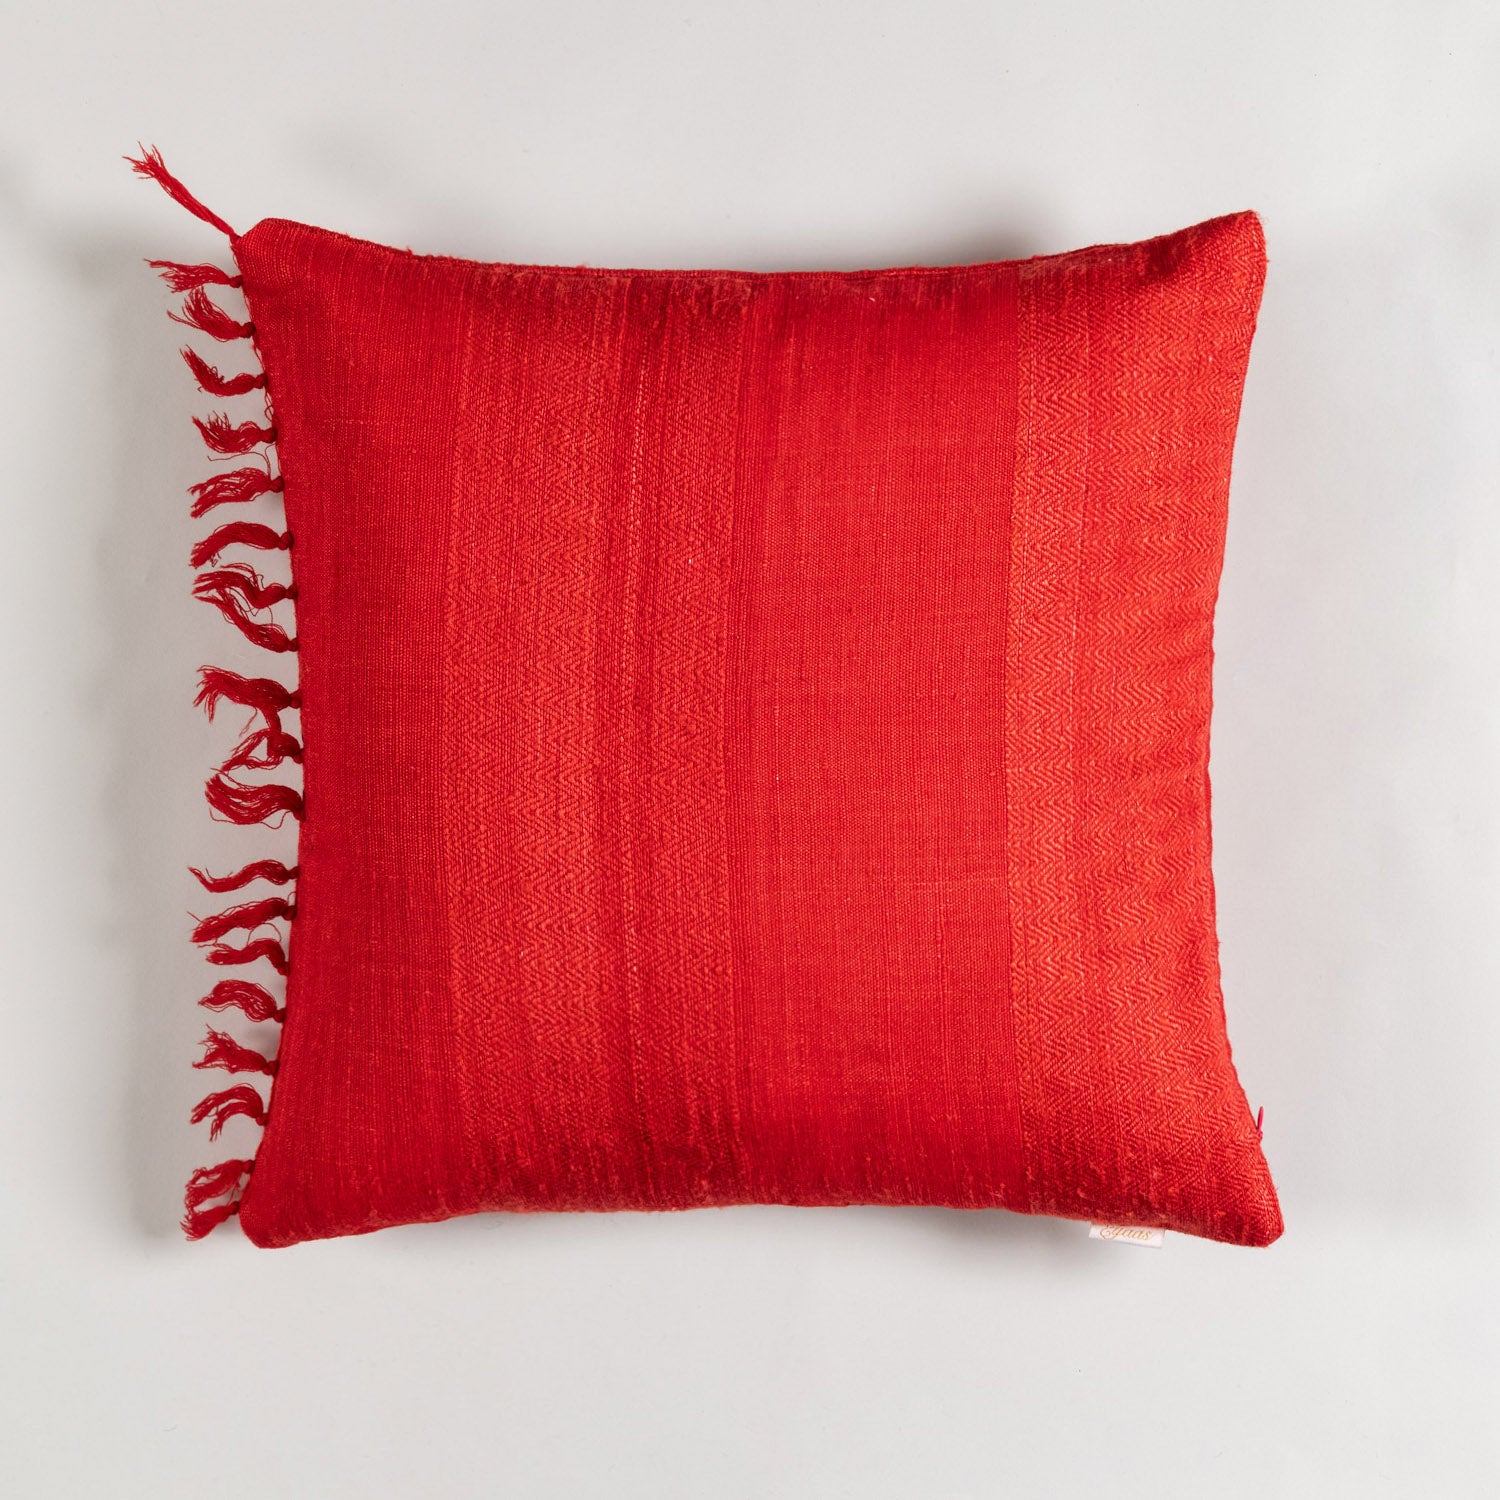 Handwoven Upcycled Red Horizontal Stripes Wool & Oak Silk Cushion Cover - 18x18